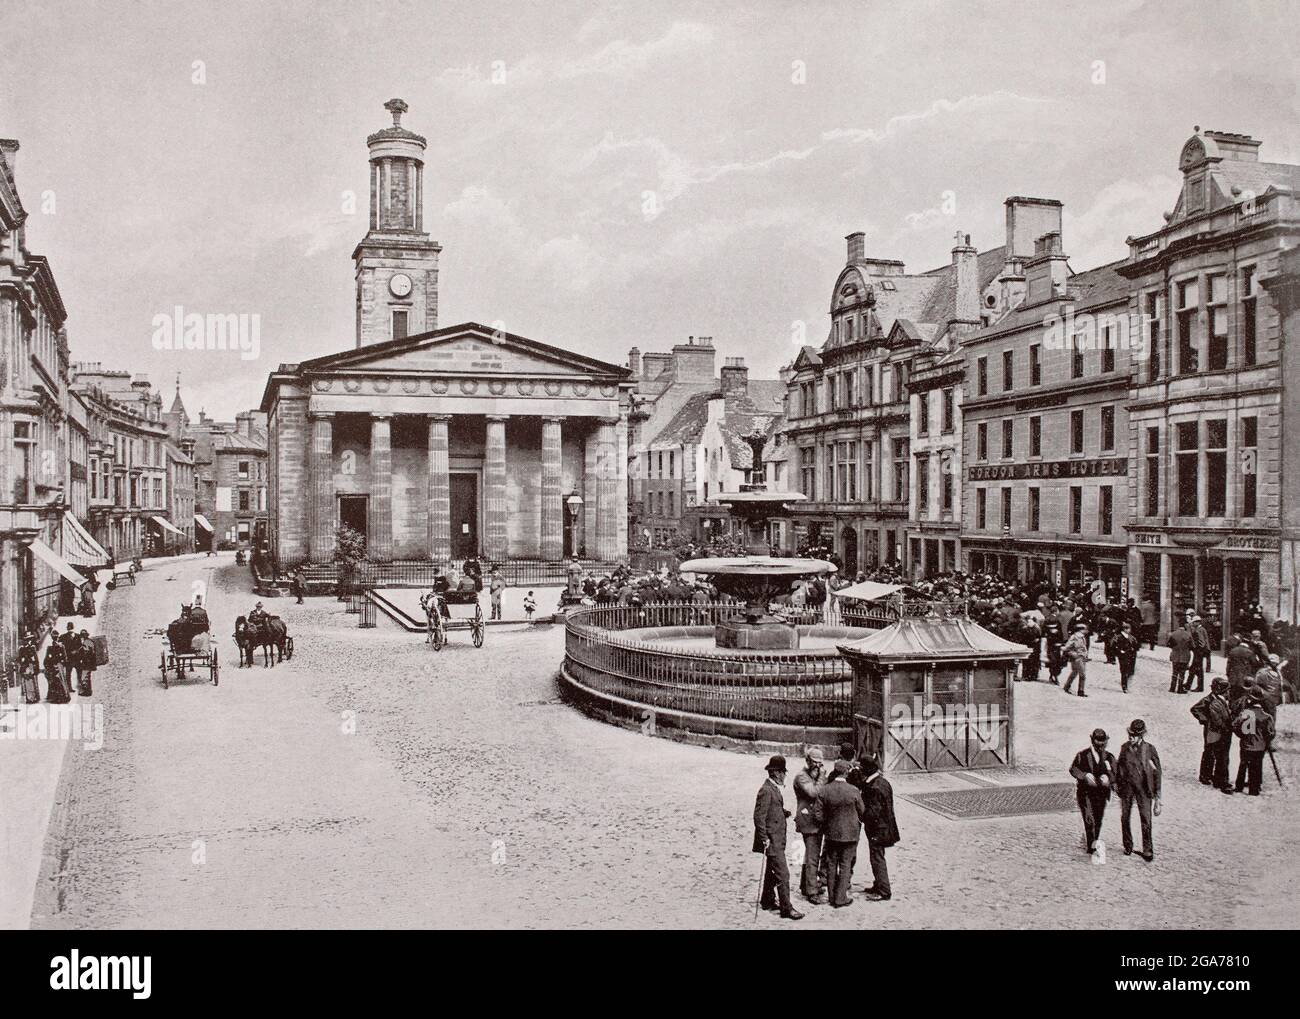 A late 19th century view of the High Street in Elgin, in Moray, Scotland, a town  created as a royal burgh in the 12th century by King David I of Scotland. At the top of the street is St Giles' Church, a Church of Scotland church situated in the centre of the town.  The church was built between 1825 and 1828 and designed in a Greek Revival style by architect Archibald Simpson. Stock Photo